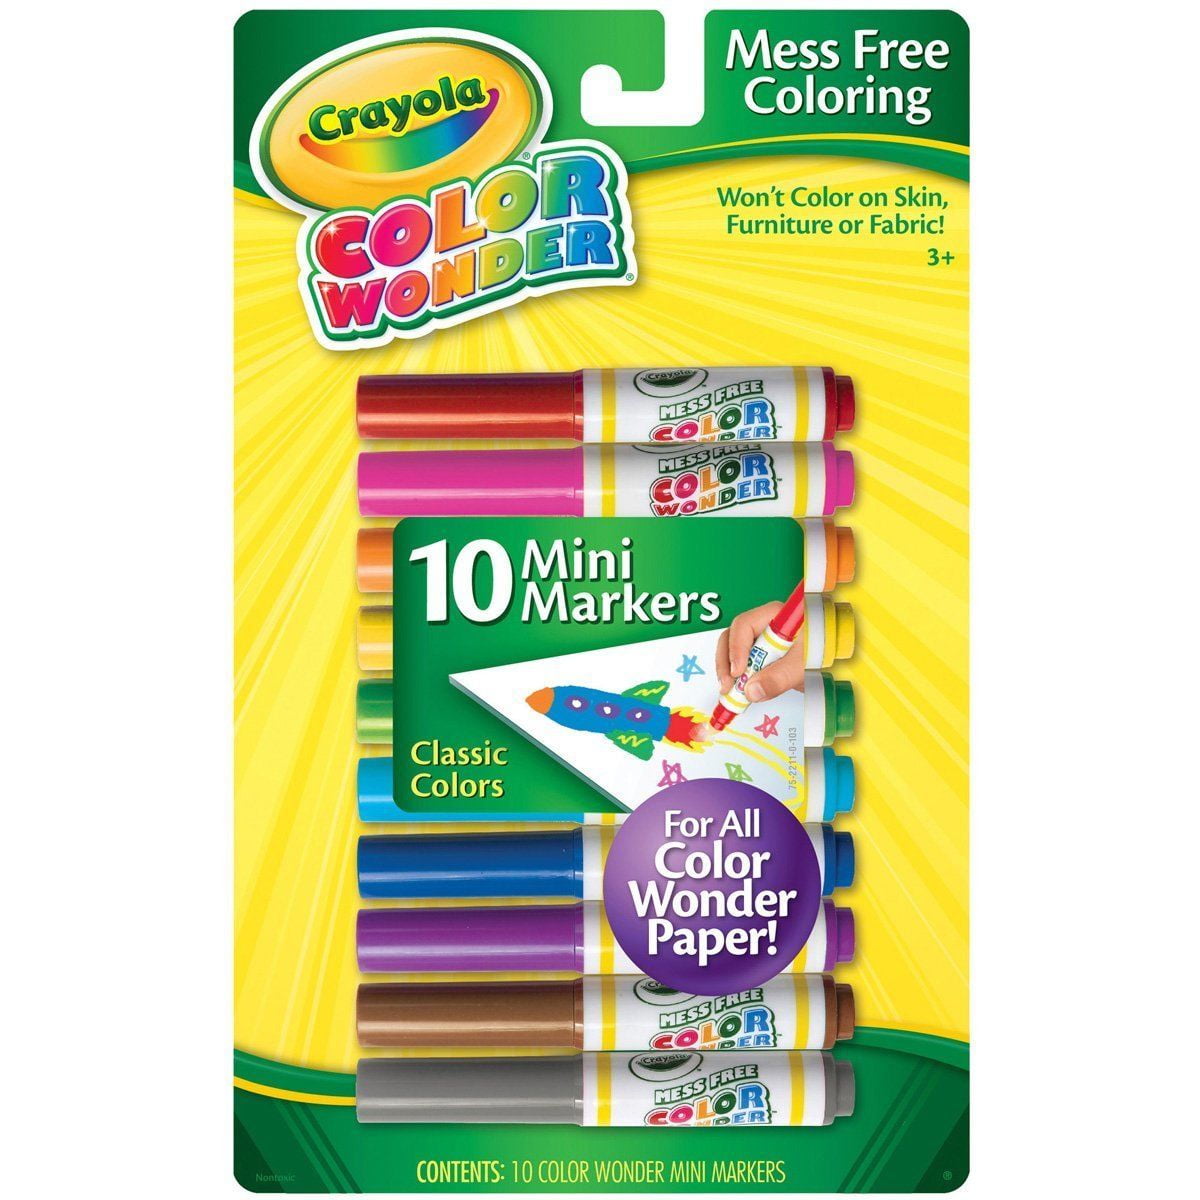 count of 4 40 marker Crayola Color Wonder 10 Mini Markers Classic